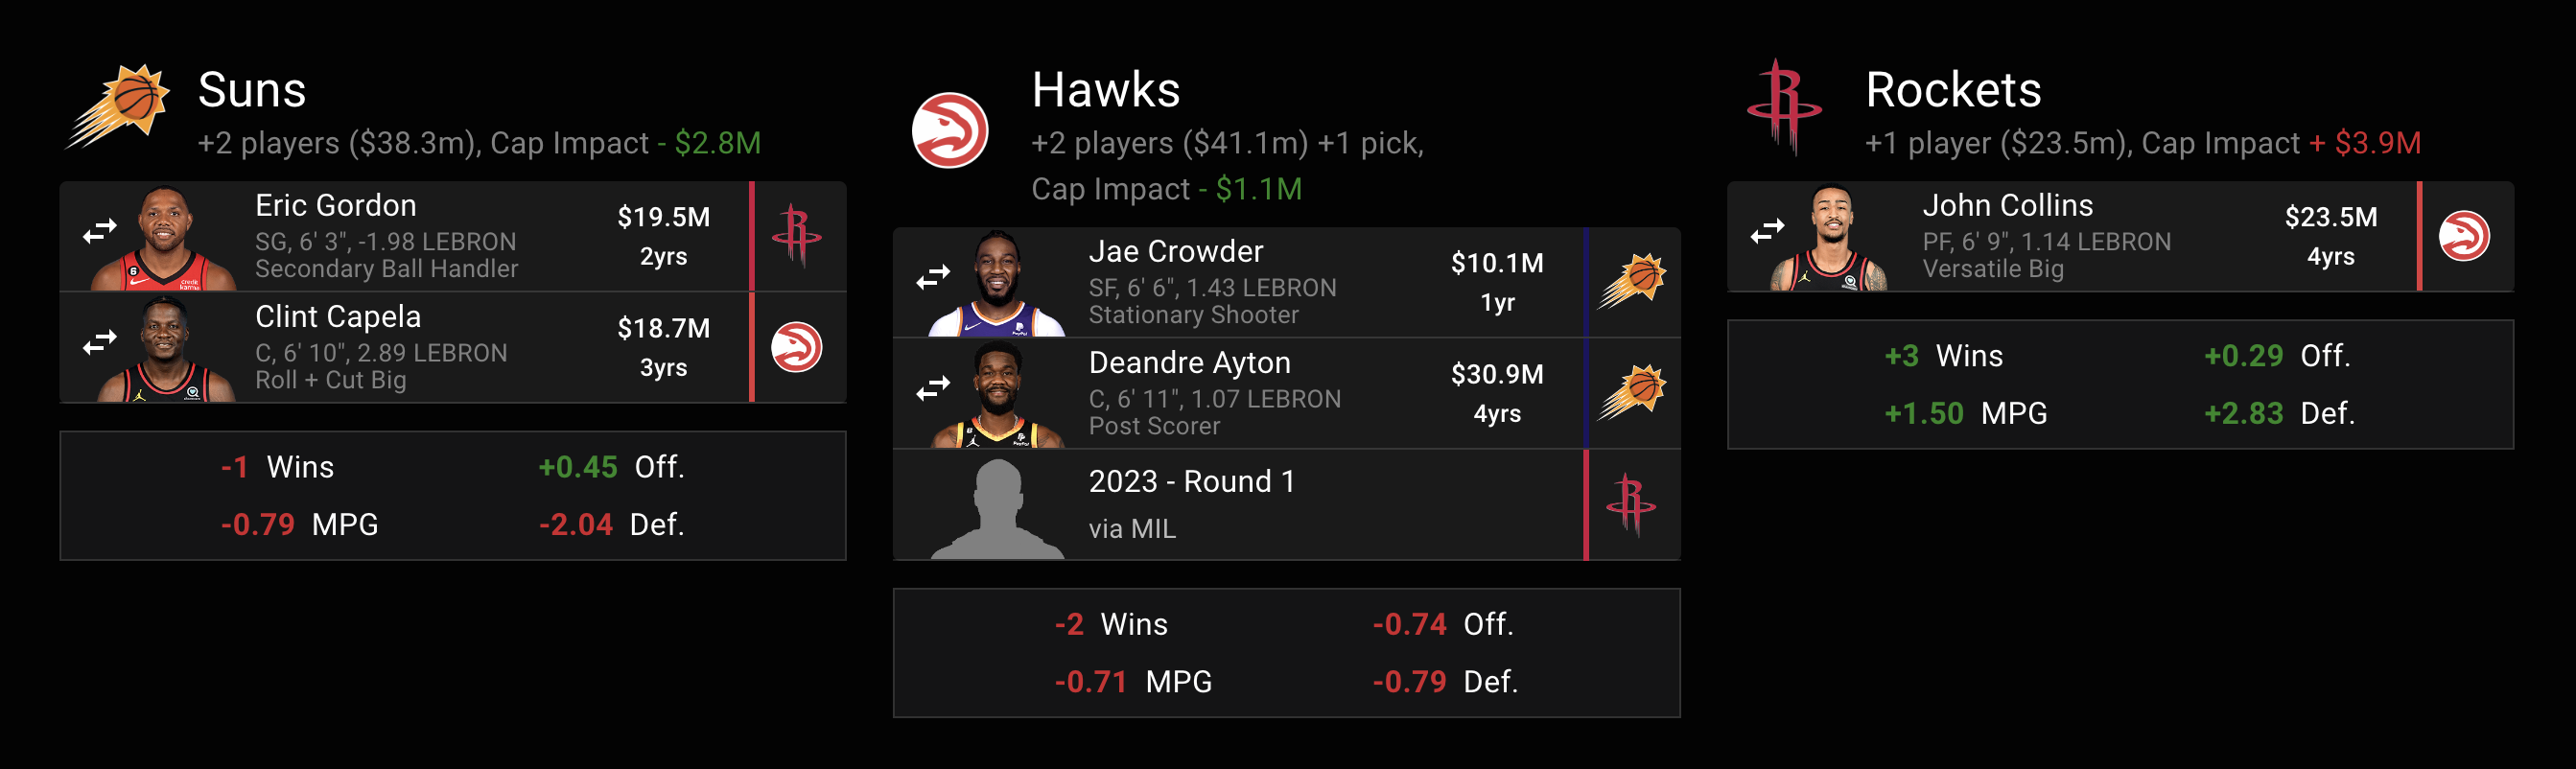 Phoenix Suns make a 3-team trade with Hawks and Rockets.